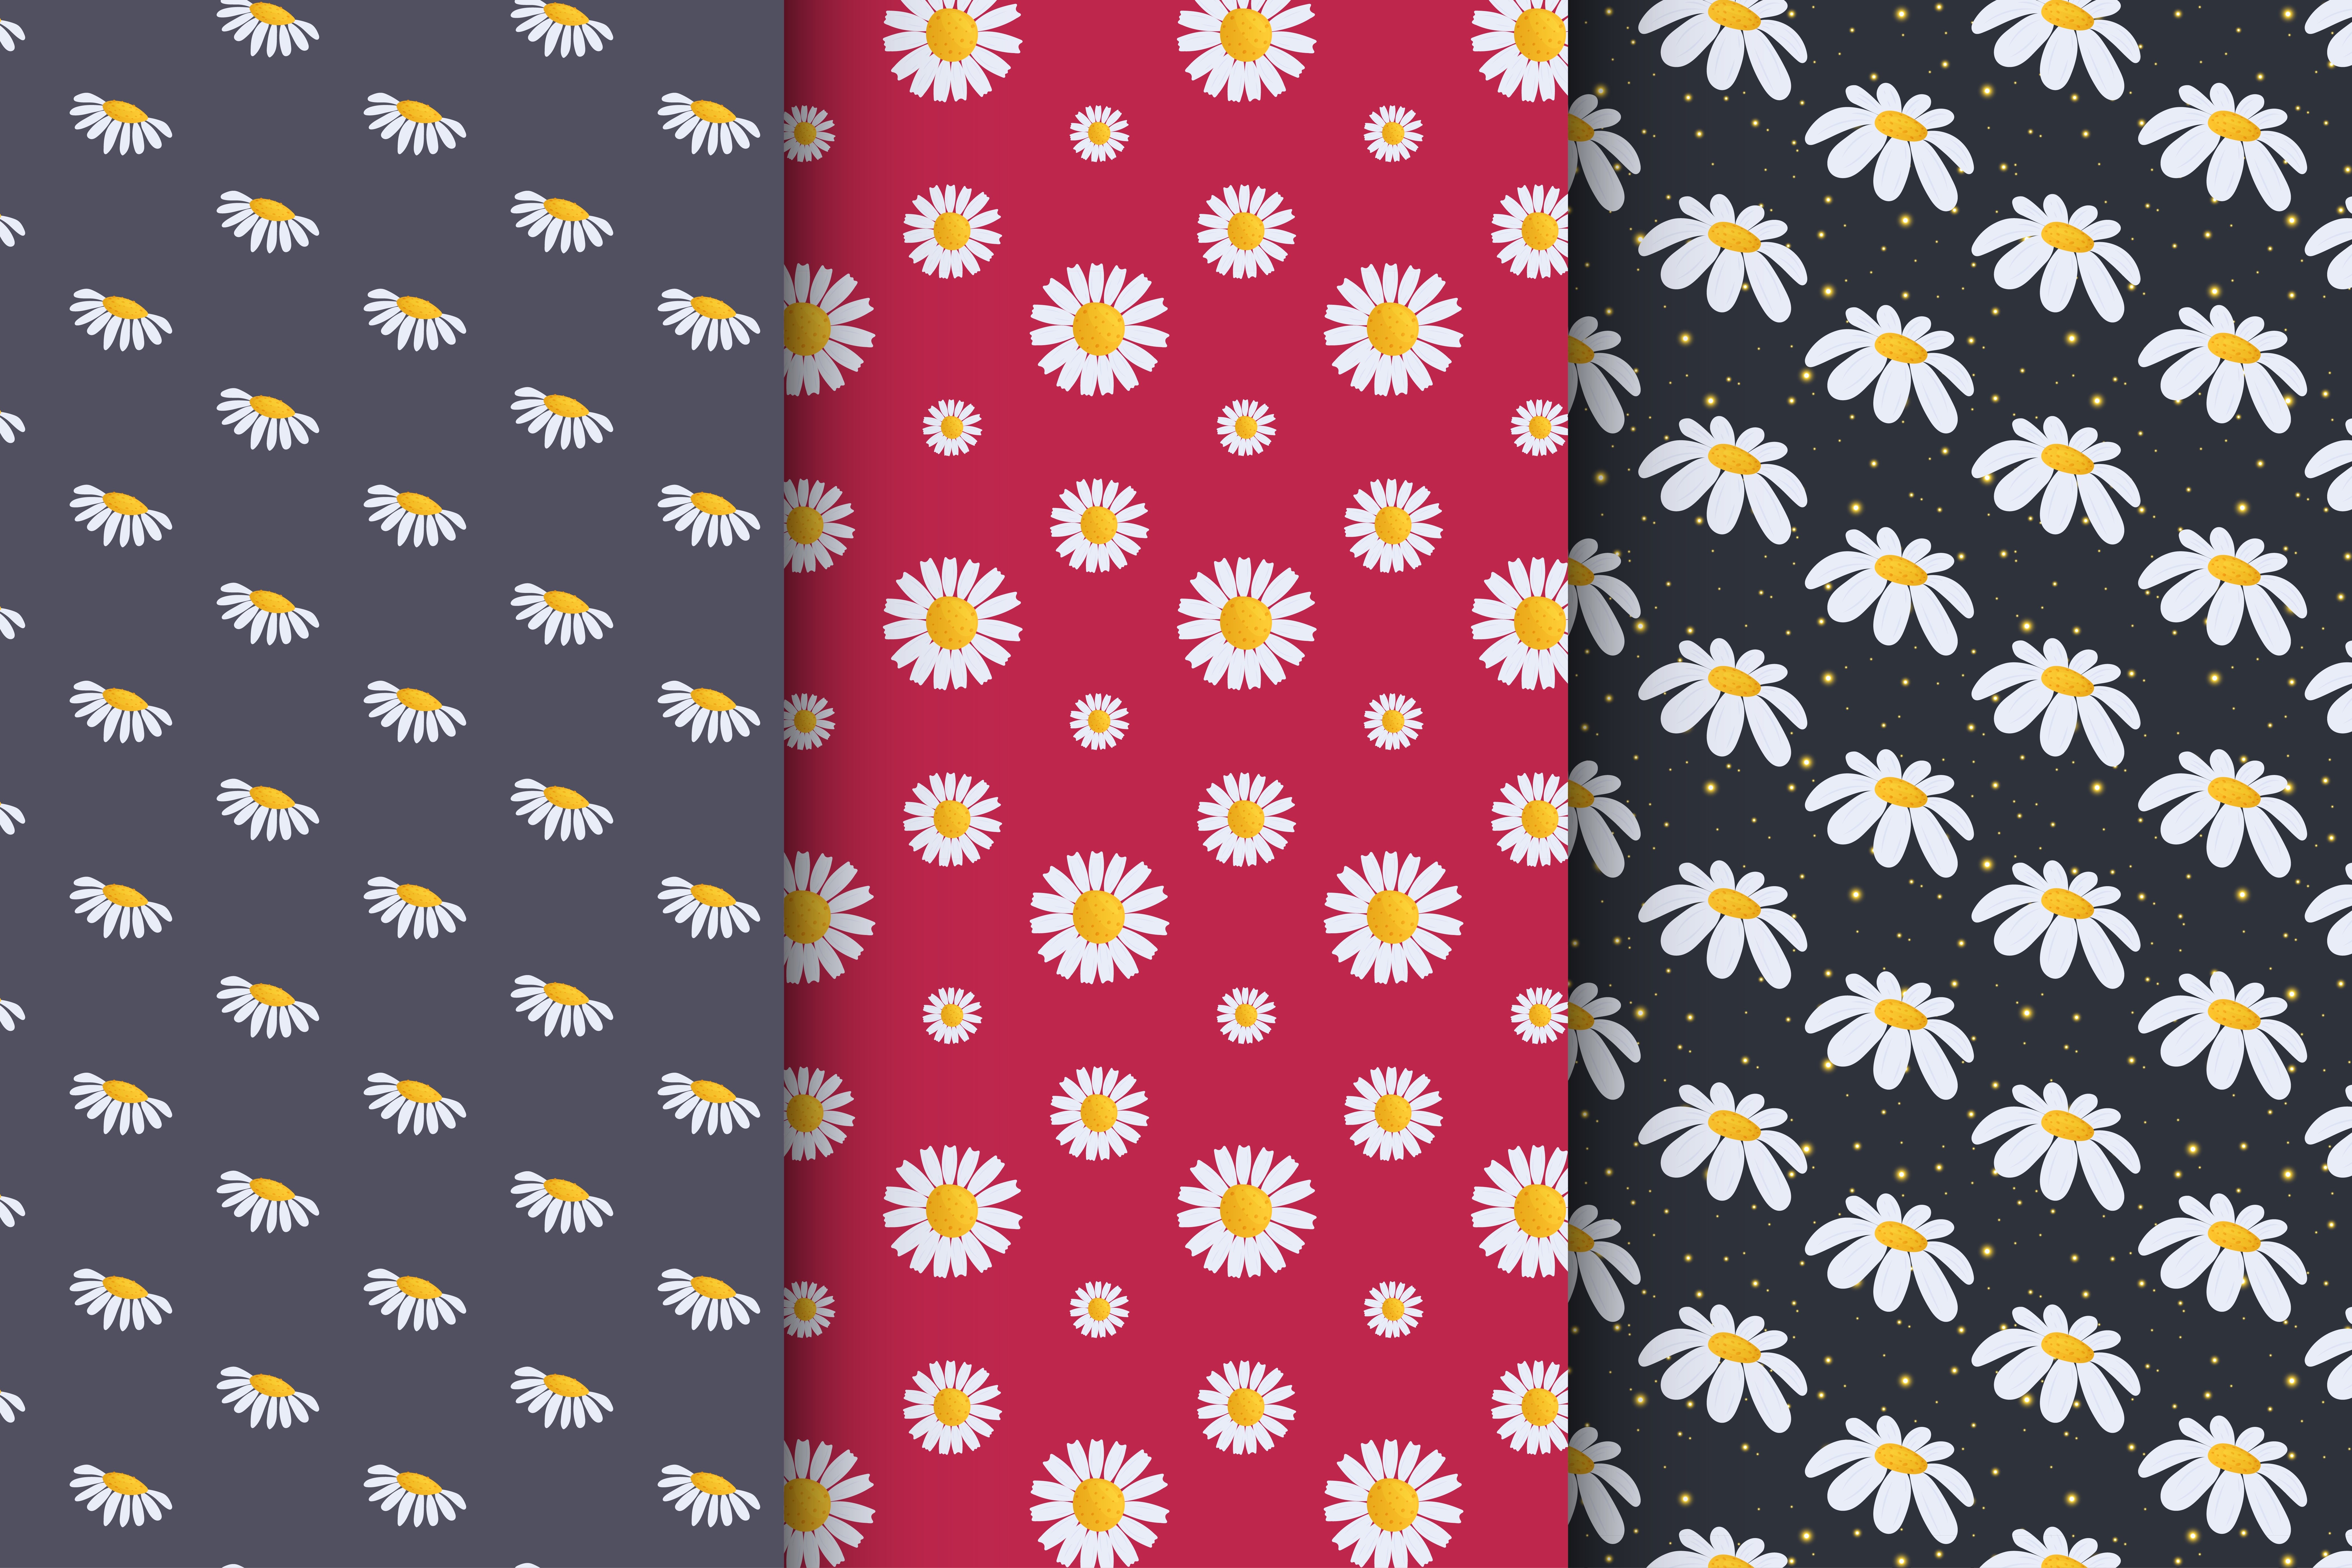 Collection of patterns with daisies, stylish set of patterns